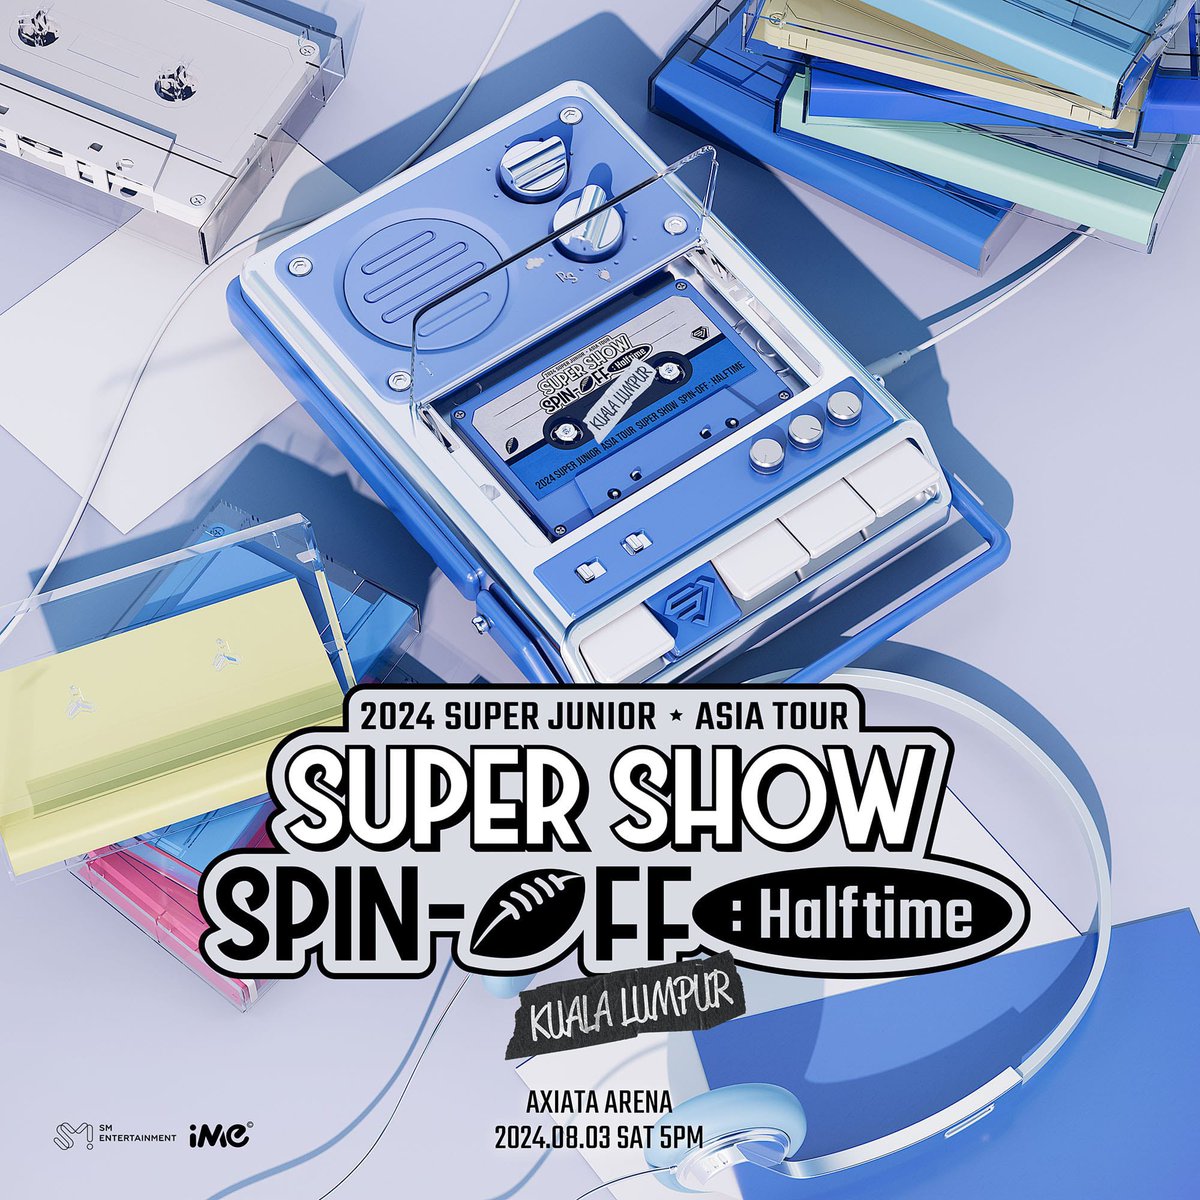 NEW EVENT ‼️ 2024 SUPER JUNIOR <SUPER SHOW SPIN-OFF: Halftime> IN KUALA LUMPUR 🔥😱 🗓️ 3 August 2024 (SAT) 🕒 5PM 🏟️ Axiata Arena Bukit Jalil #SuperShow_Spinoff_Halftime #SSS_HALFTIME #슈퍼주니어 #SUPERJUNIOR #SUPERJUNIORinKL #SUPERJUNIORinMY #SSS_HALFTIME_KL…